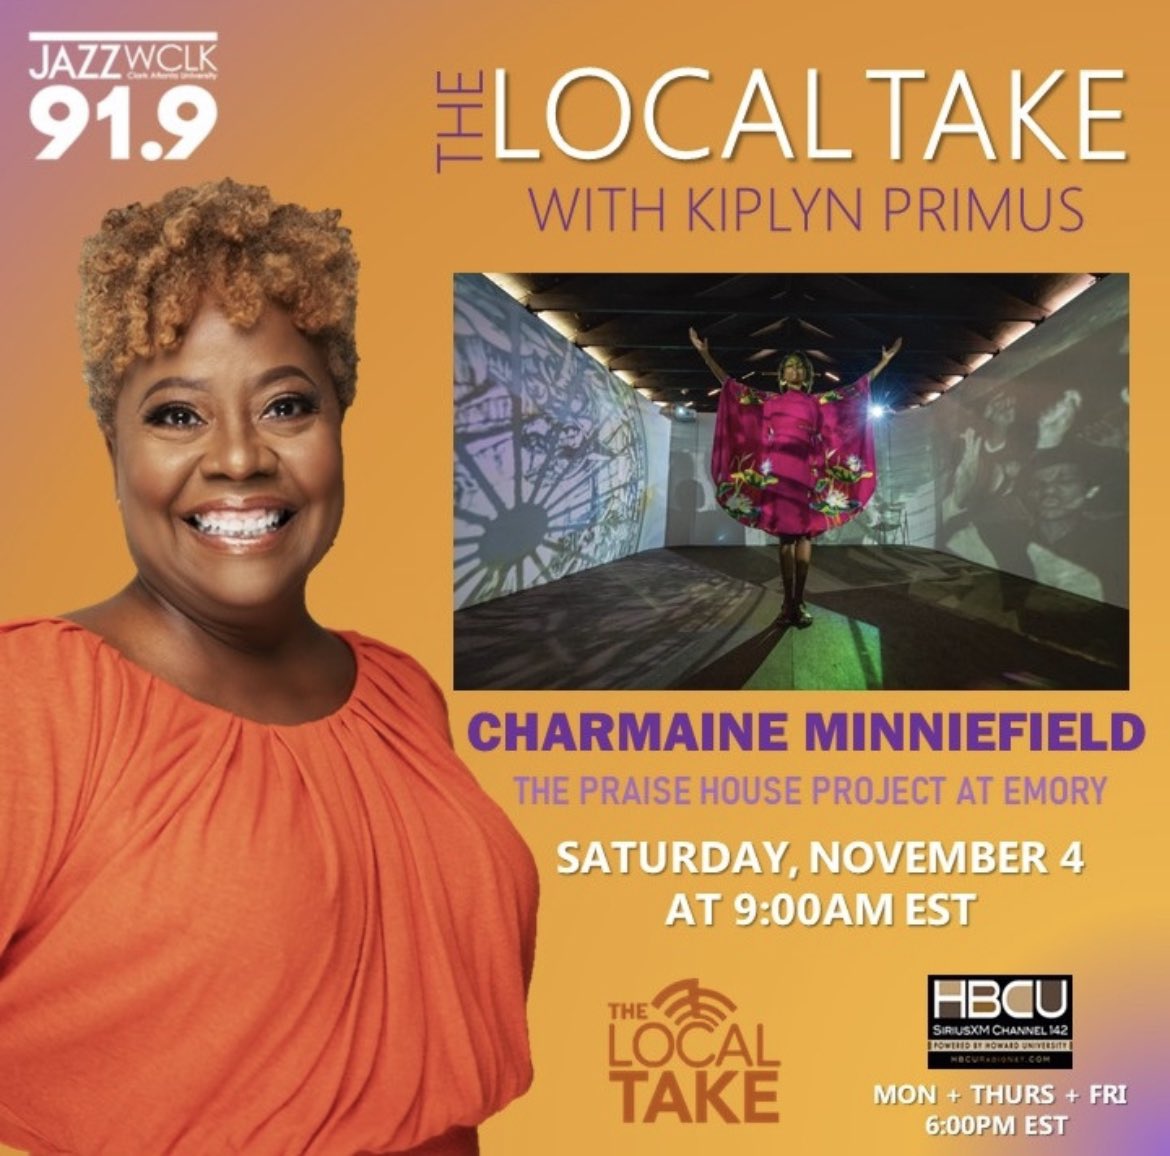 Listen 🎧 to this week’s edition of #TheLocalTake with #KiplynPrimus NOW on-demand on WCLK.com ❤️We are the #JazzoftheCity #WCLK919